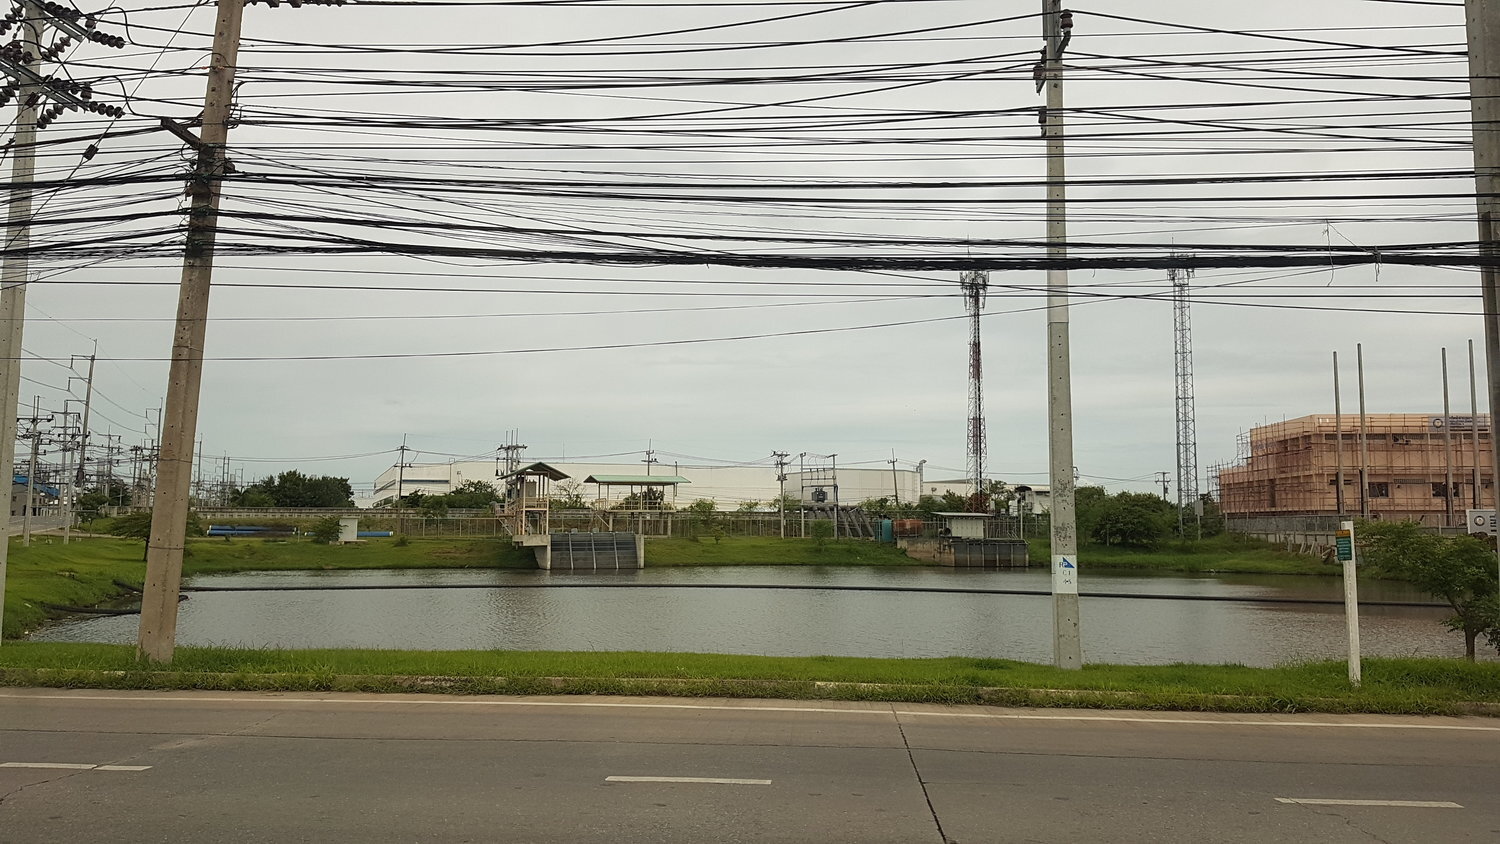  Photo 4: Japan’s investment into Thailand, especially since the 1980s, catalyzed wide-spread industrialization. In Ayuthaya, rice fields transformed into industrial estates for car and electronics manufacture. (Photo: Carl Middleton) 